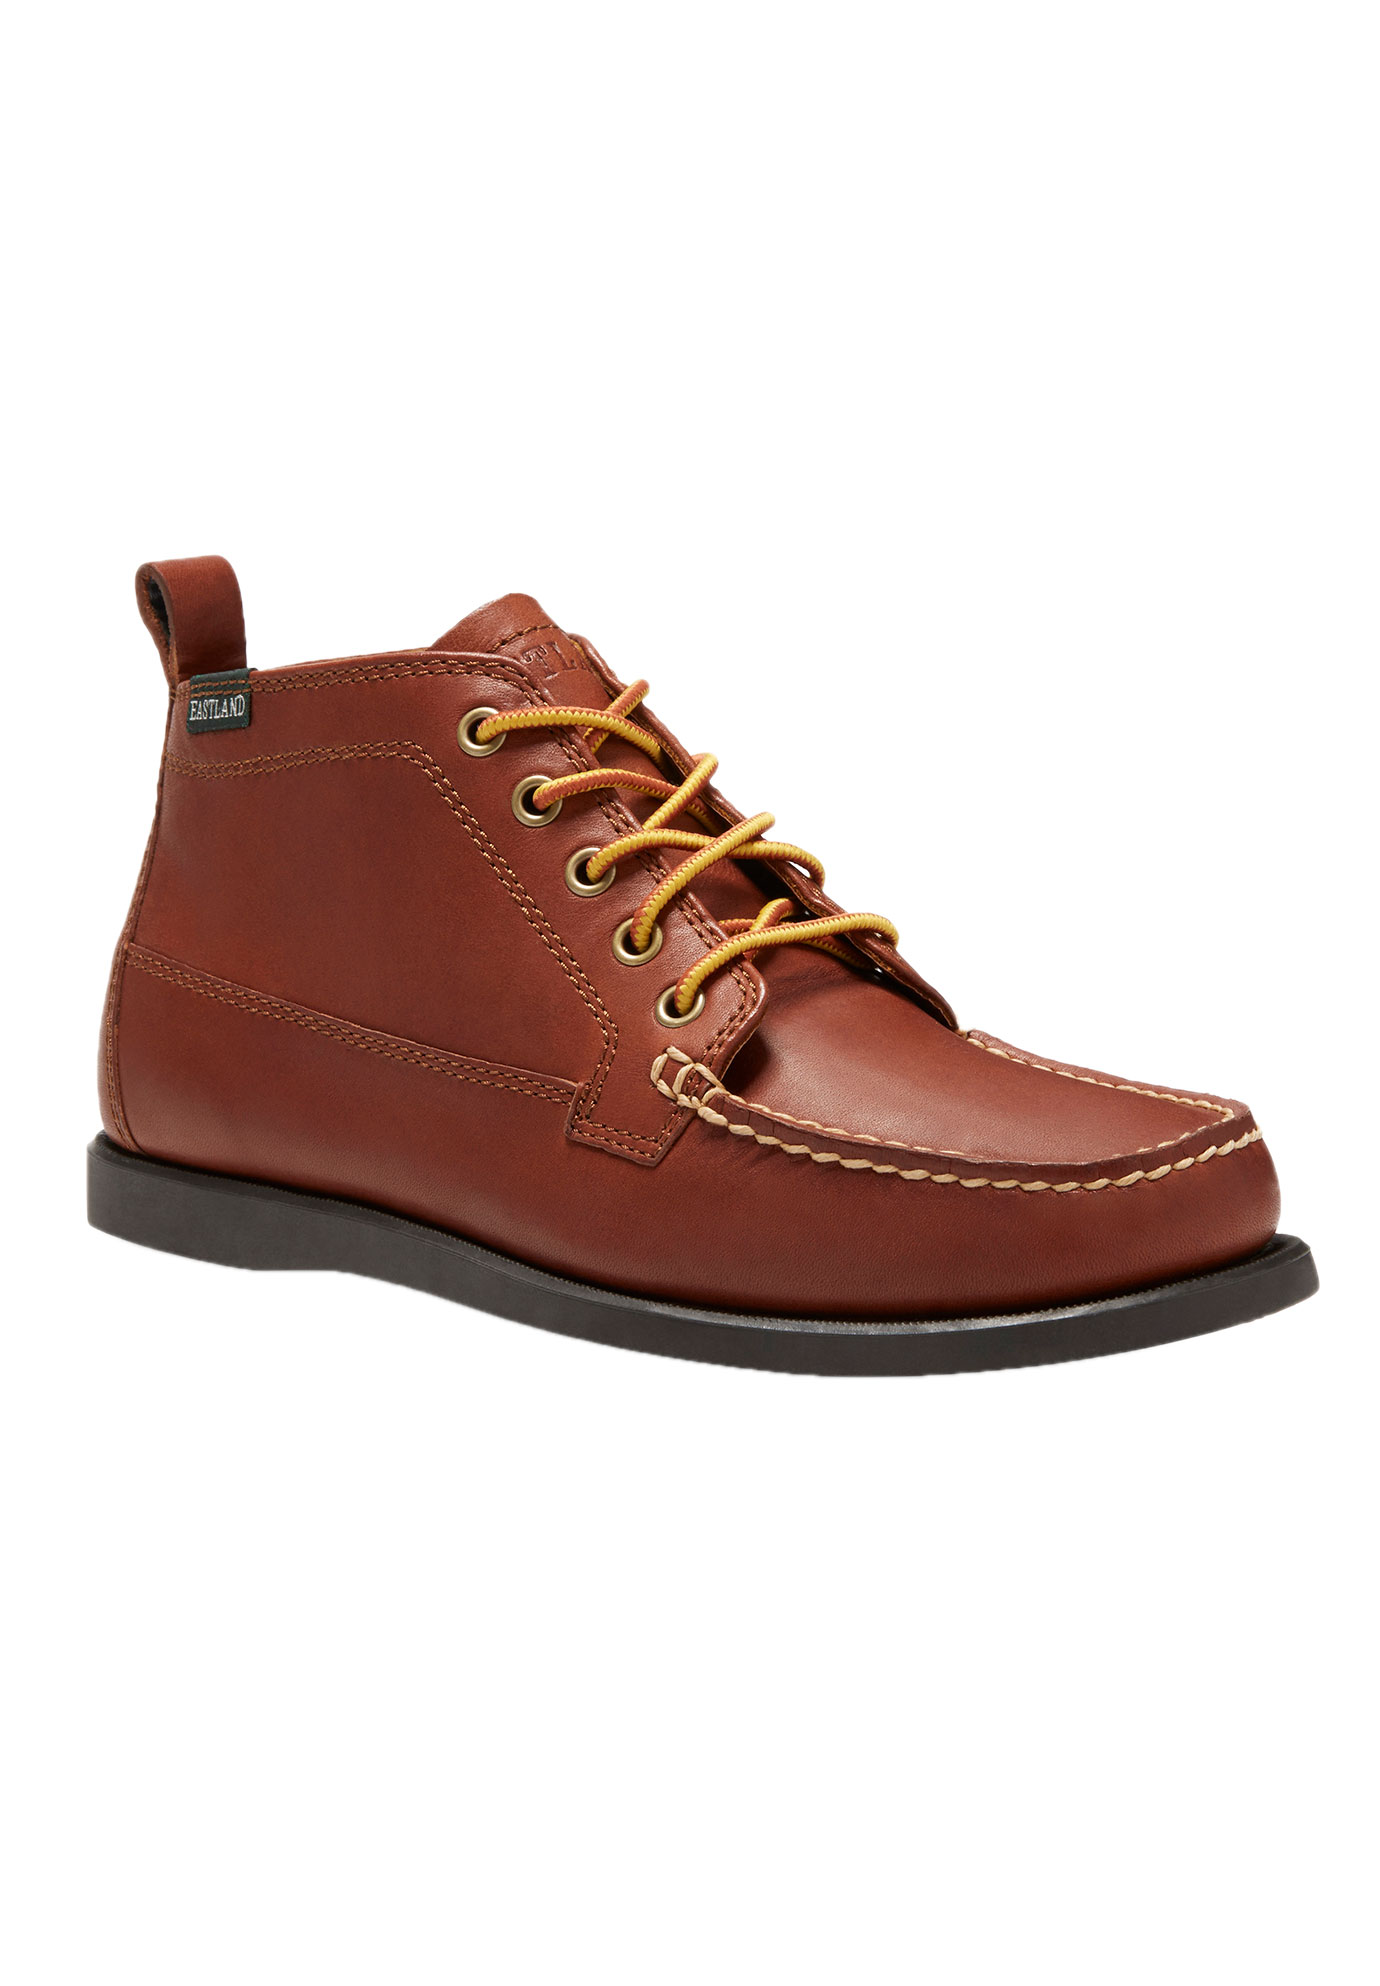 Seneca Camp Moc Chukka Boots by Eastland®| Big and Tall Boots | King Size